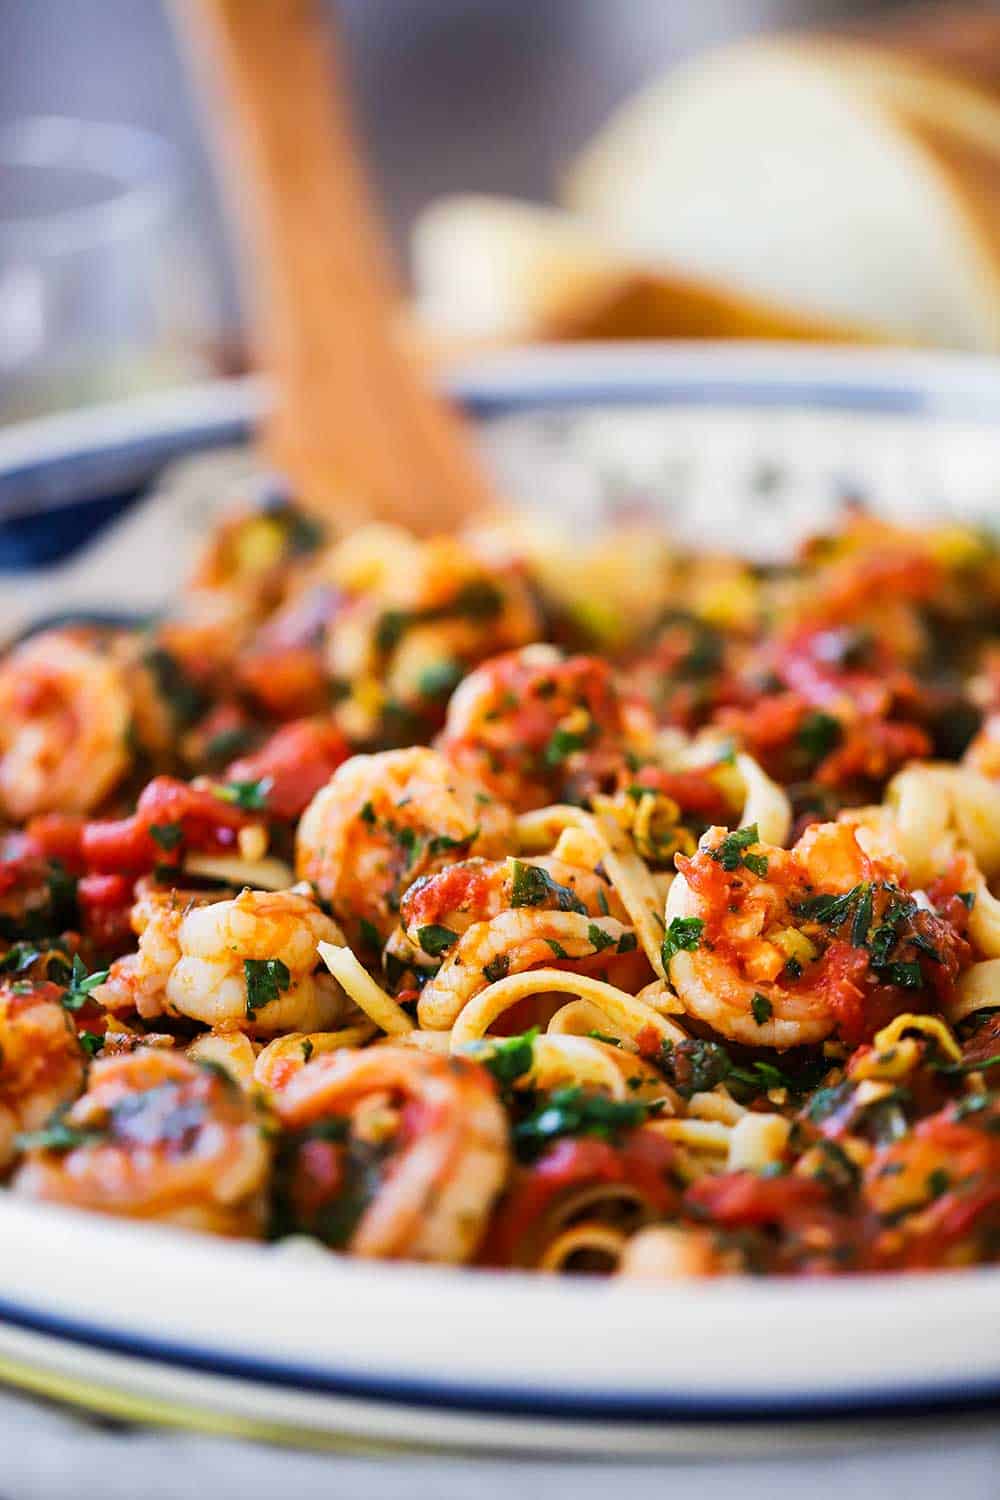 A close up view of a large pasta bowl filled with shrimp fra diavolo and a large wooden spoon inserted into it.